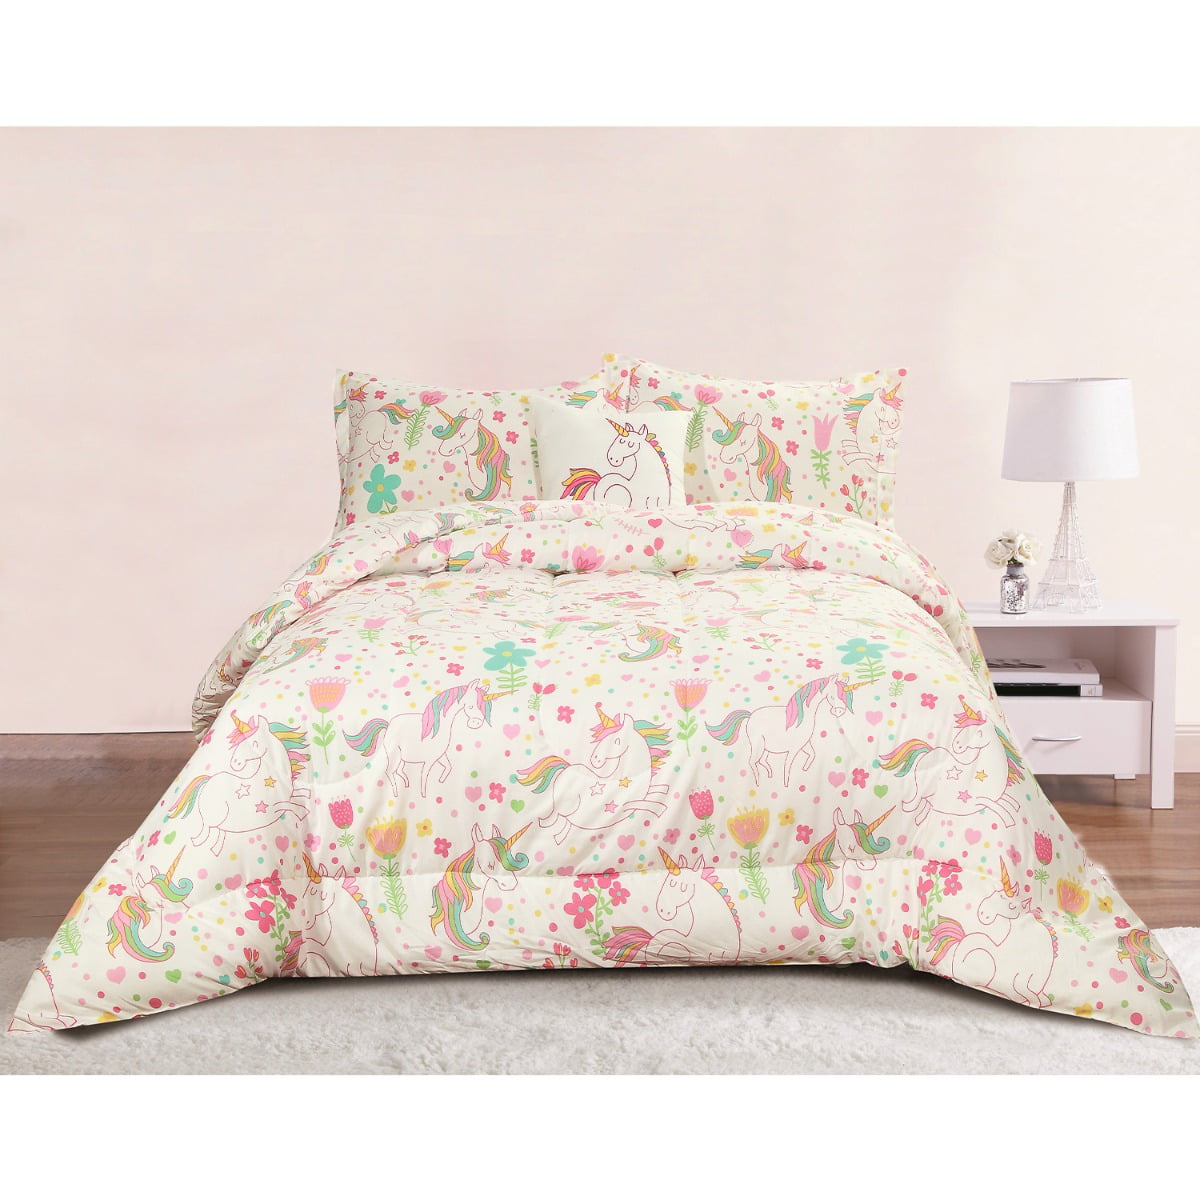 Kids Zone Home Linen Turquoise Lily 3pc Full/Queen Over Size Bedspread with Beautiful Turquoise Flowers Print. 